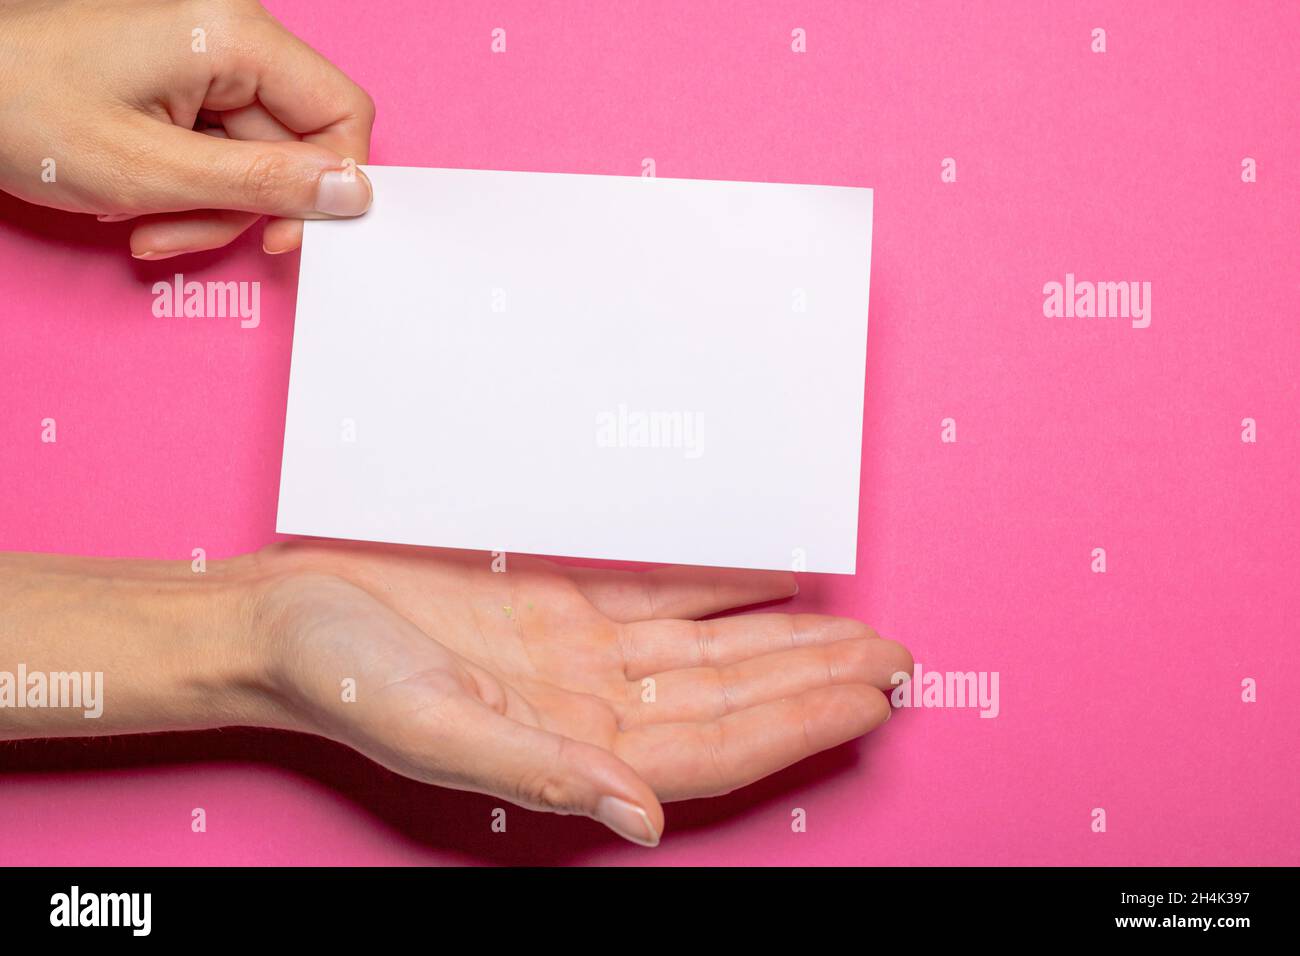 female hand holds a blank piece of paper with copy space in front of a Hot Pink background cardboard with the hand making a presenting gesture Stock Photo